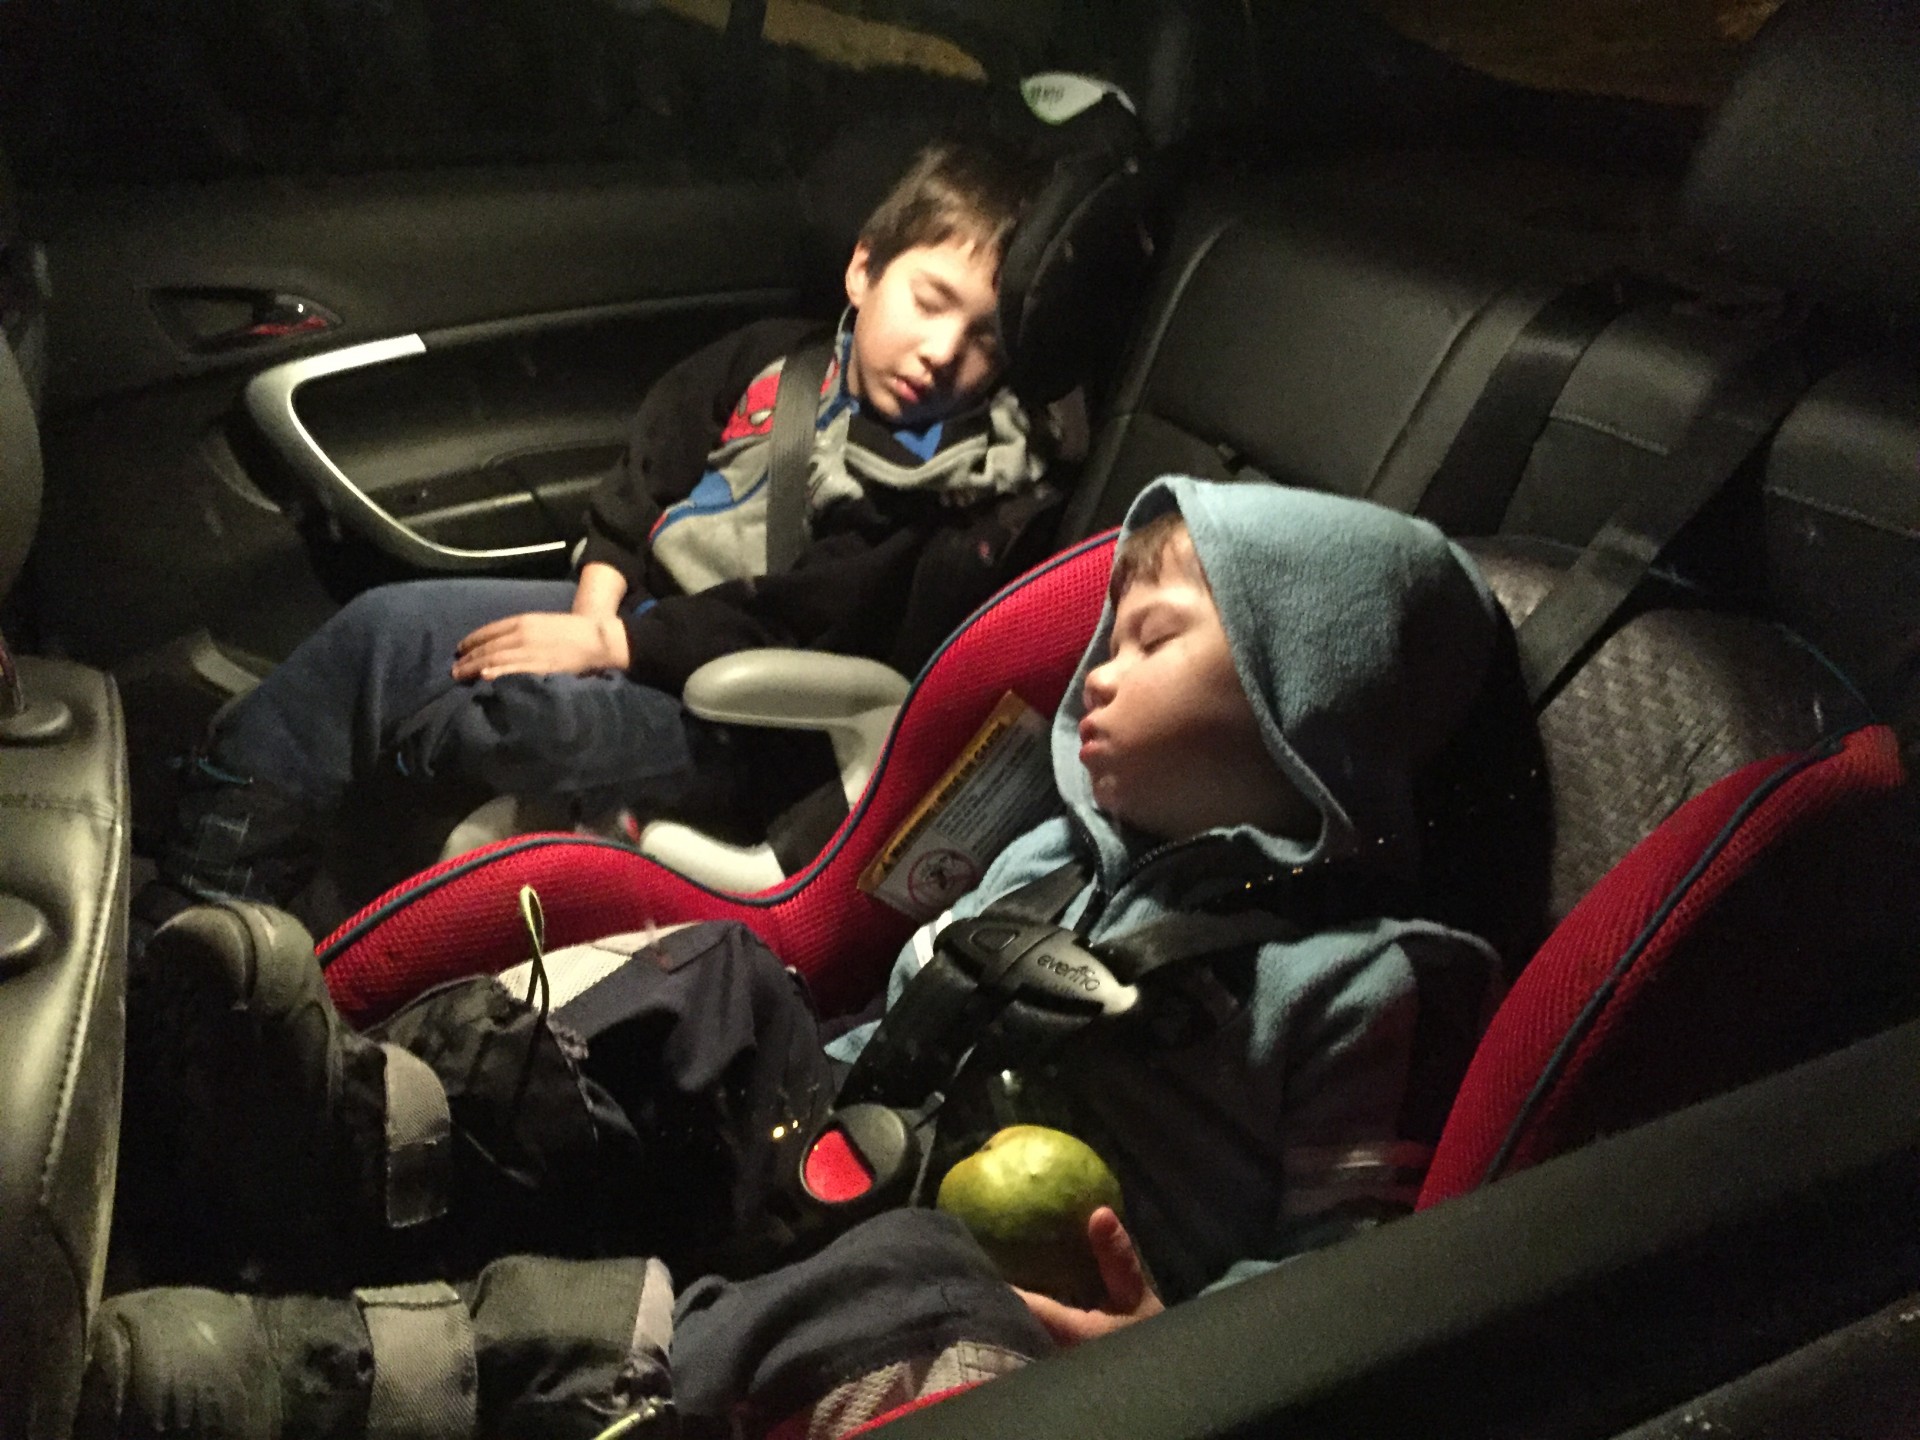 Two children sleep in a carseat - helping kids find nap time on the road